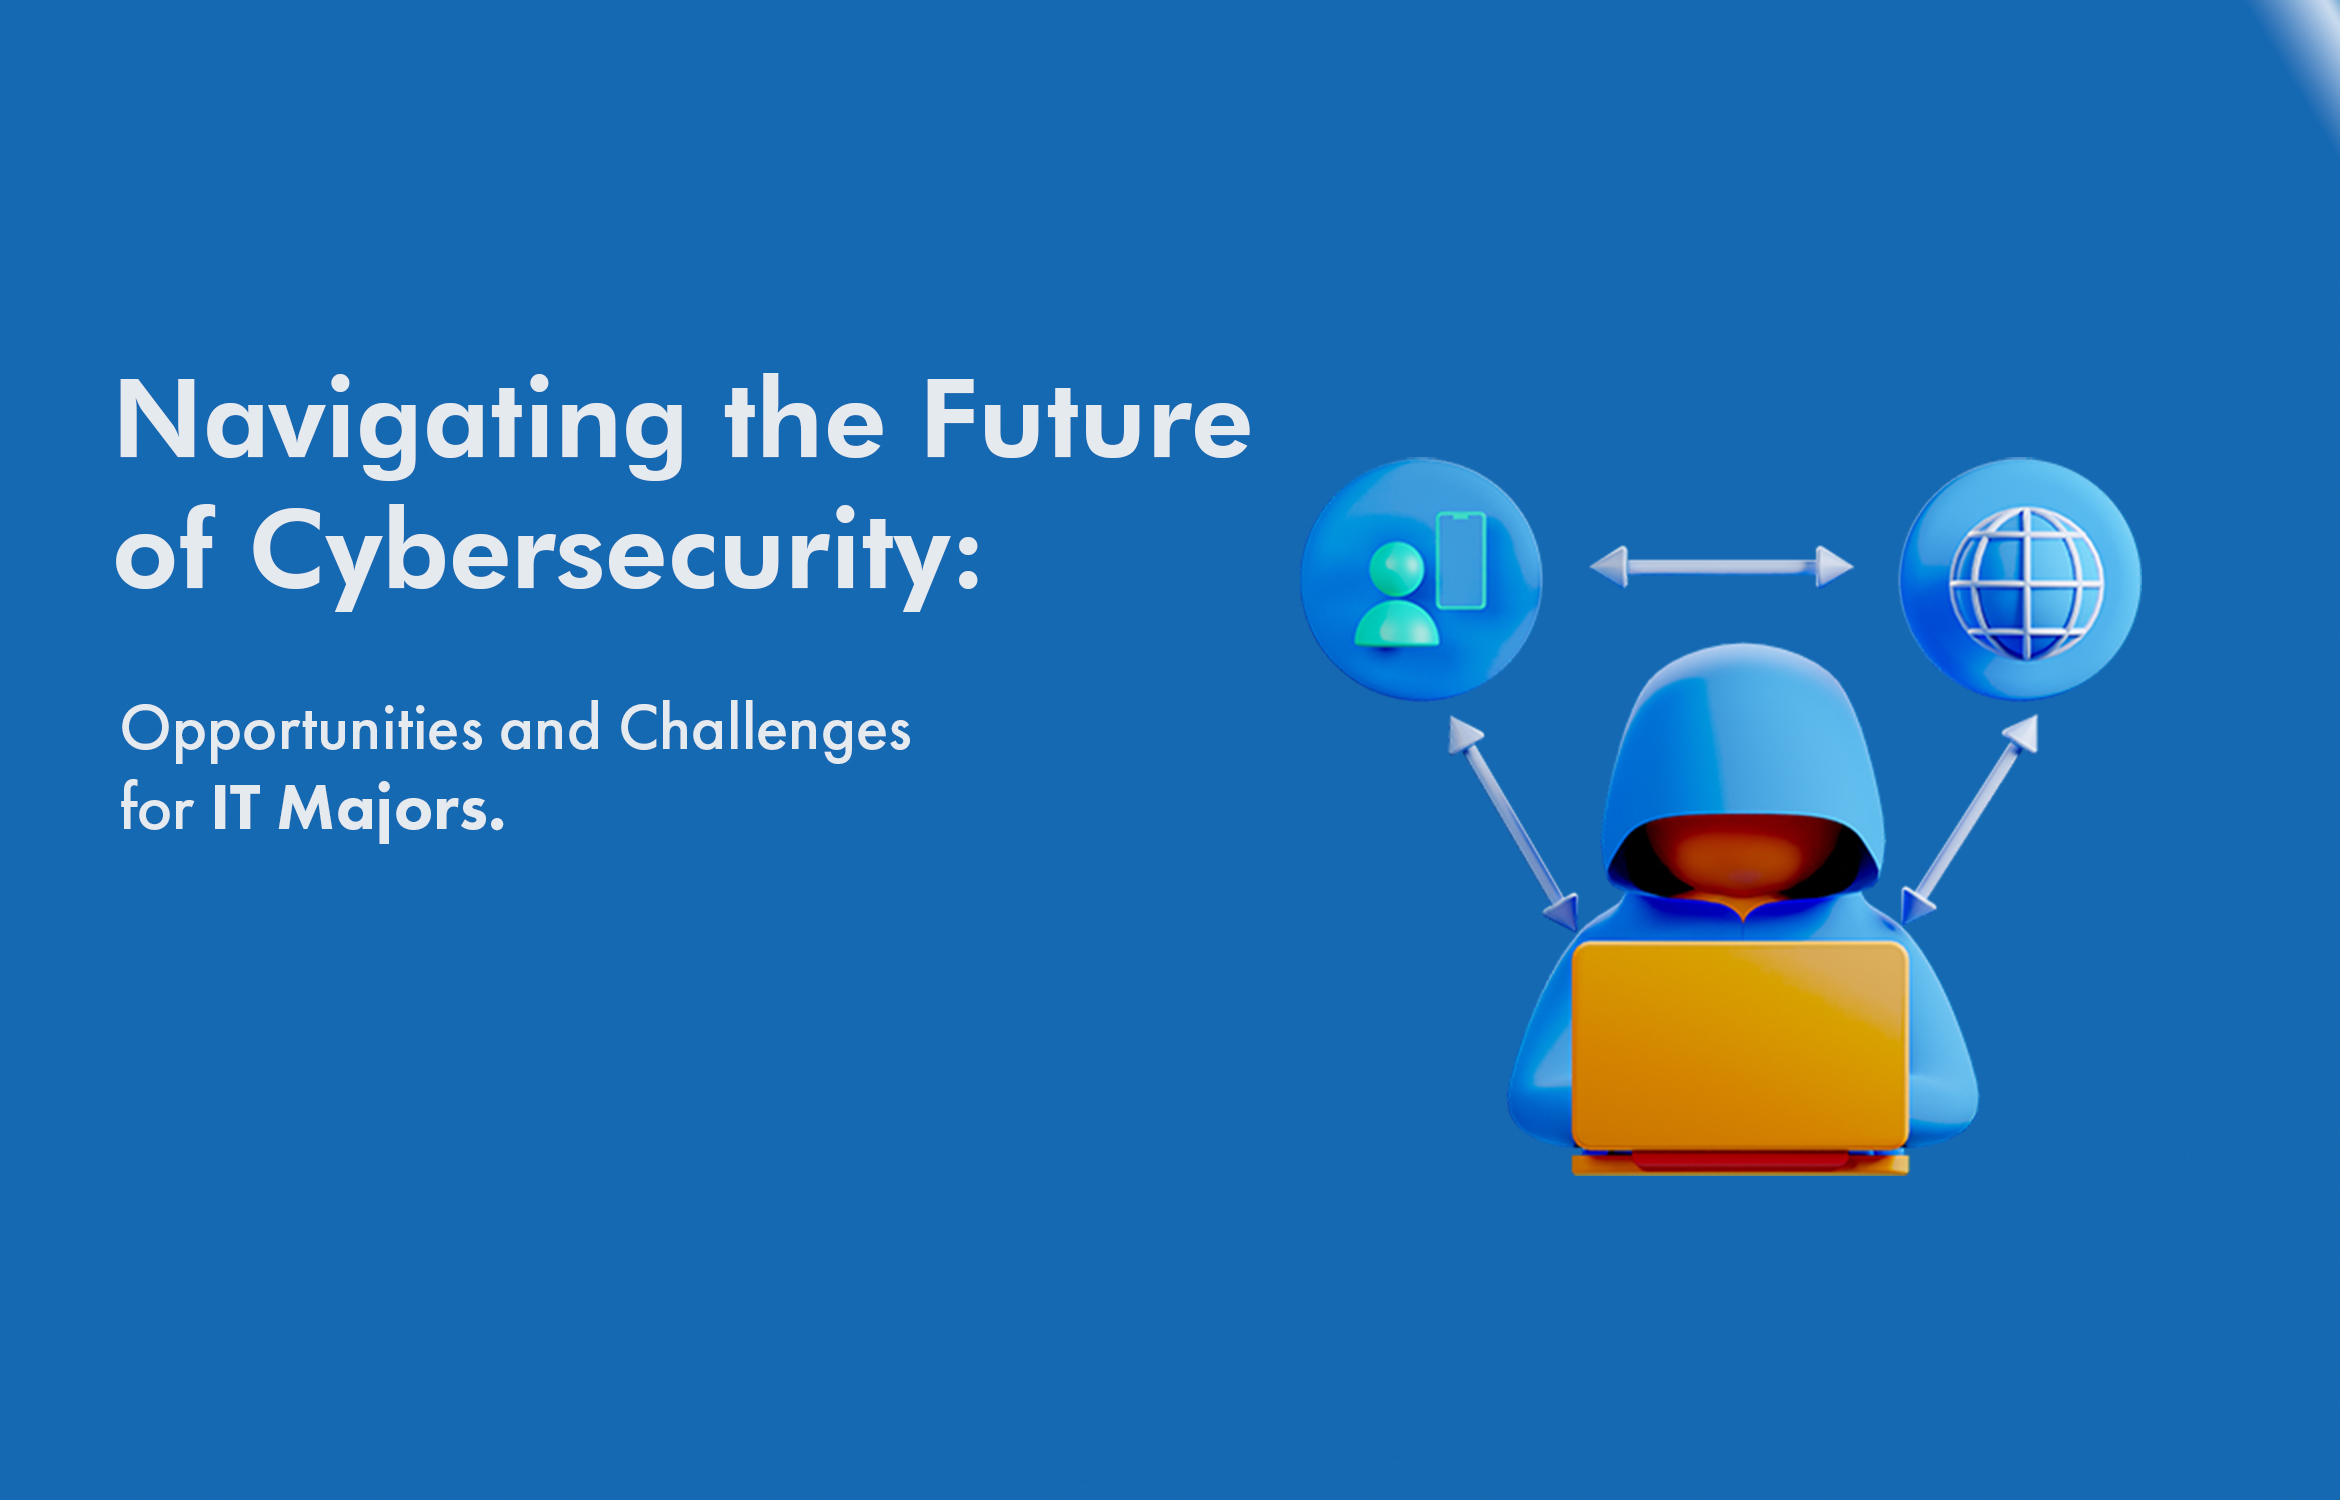 Navigating the Future of Cybersecurity Opportunities and Challenges for IT Majors